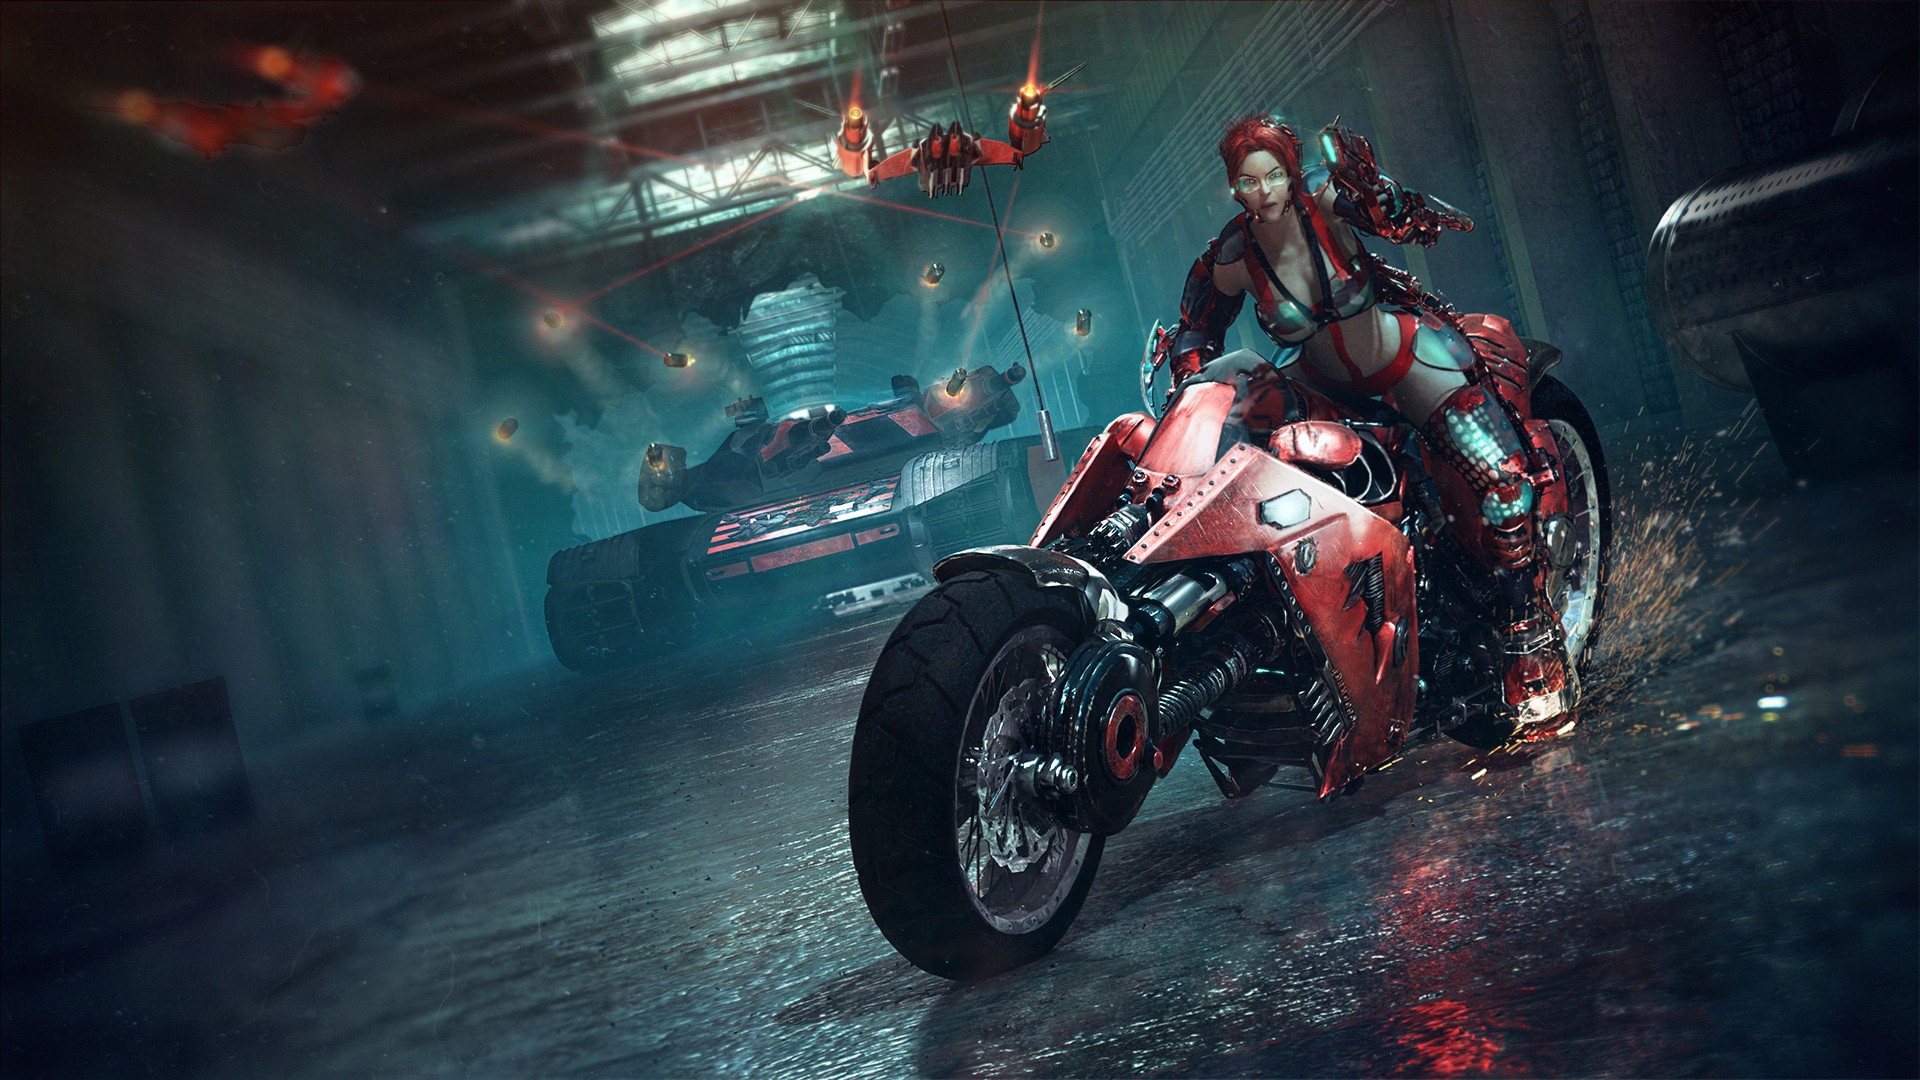 General 1920x1080 women motorcycle cyberpunk women with motorcycles vehicle science fiction futuristic artwork tank redhead science fiction women digital art military vehicle Red Motorcycles